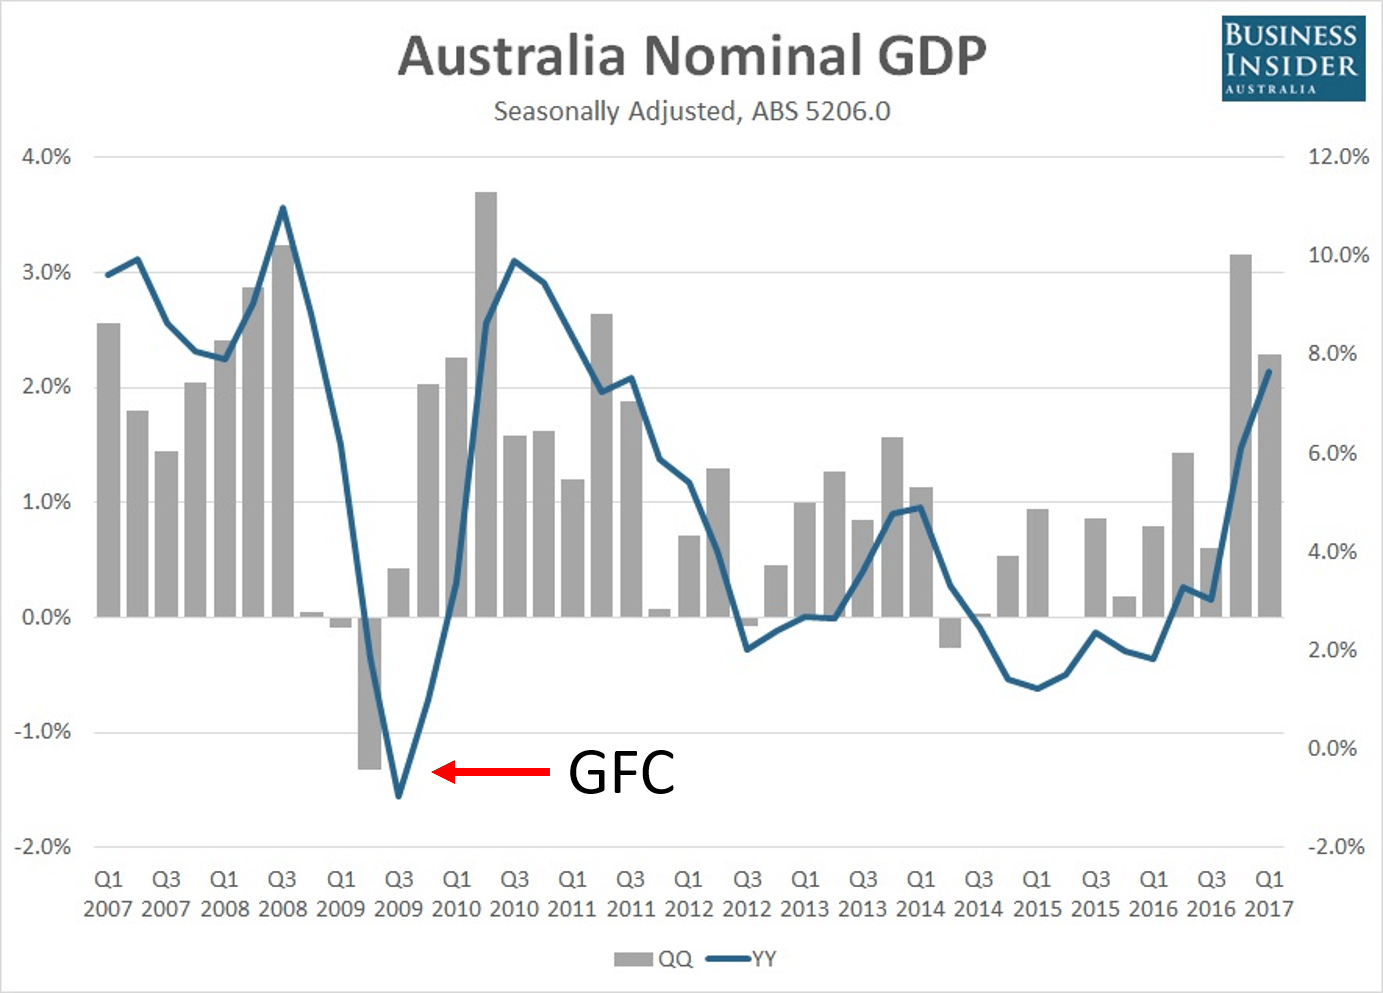 Australia's nominal GDP increased significantly after GFC